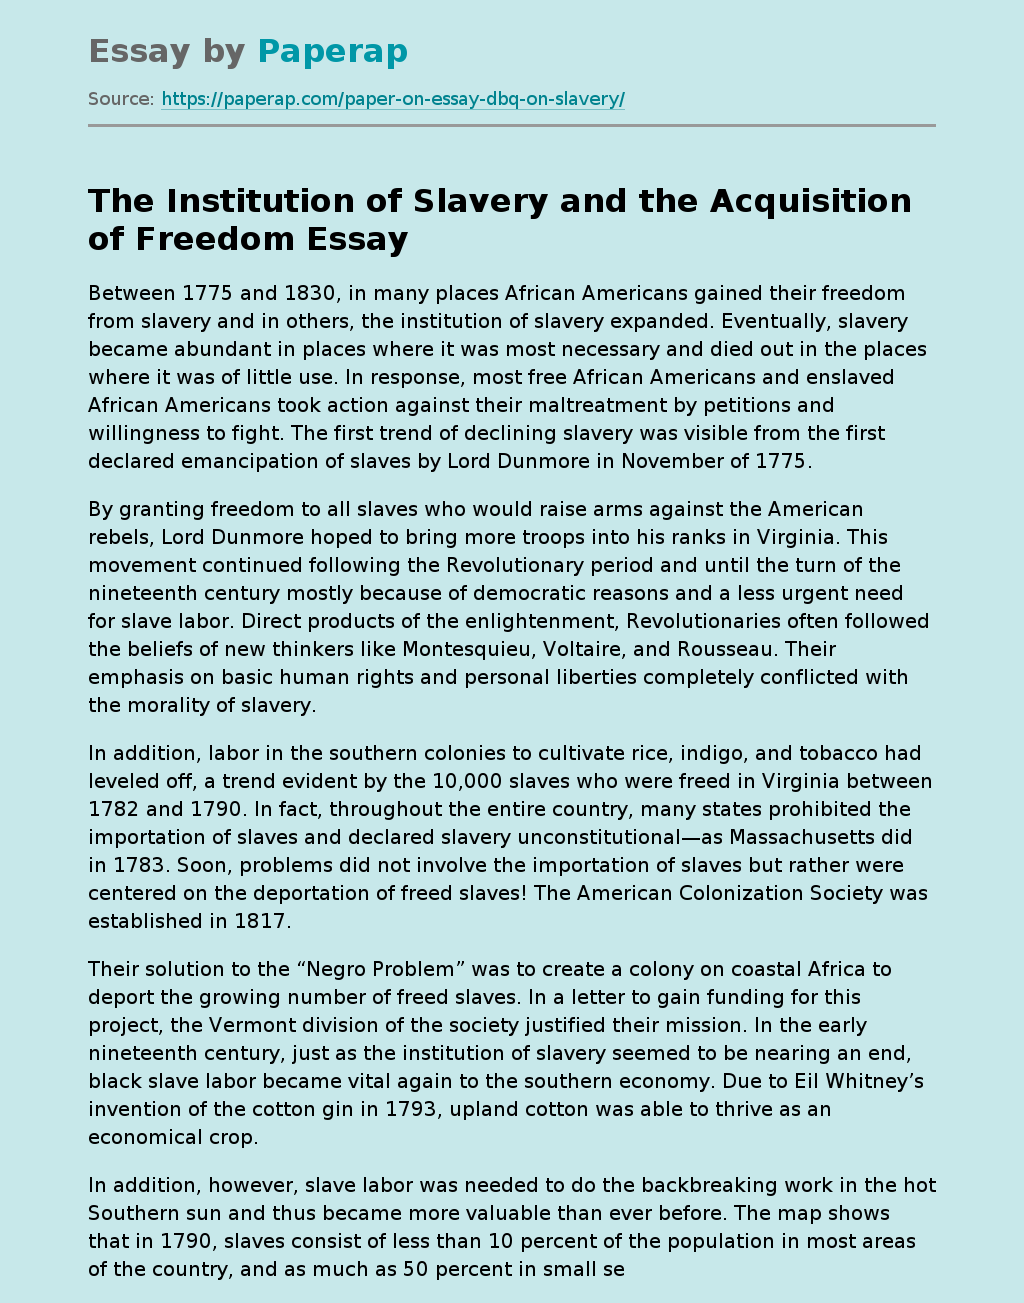 The Institution of Slavery and the Acquisition of Freedom